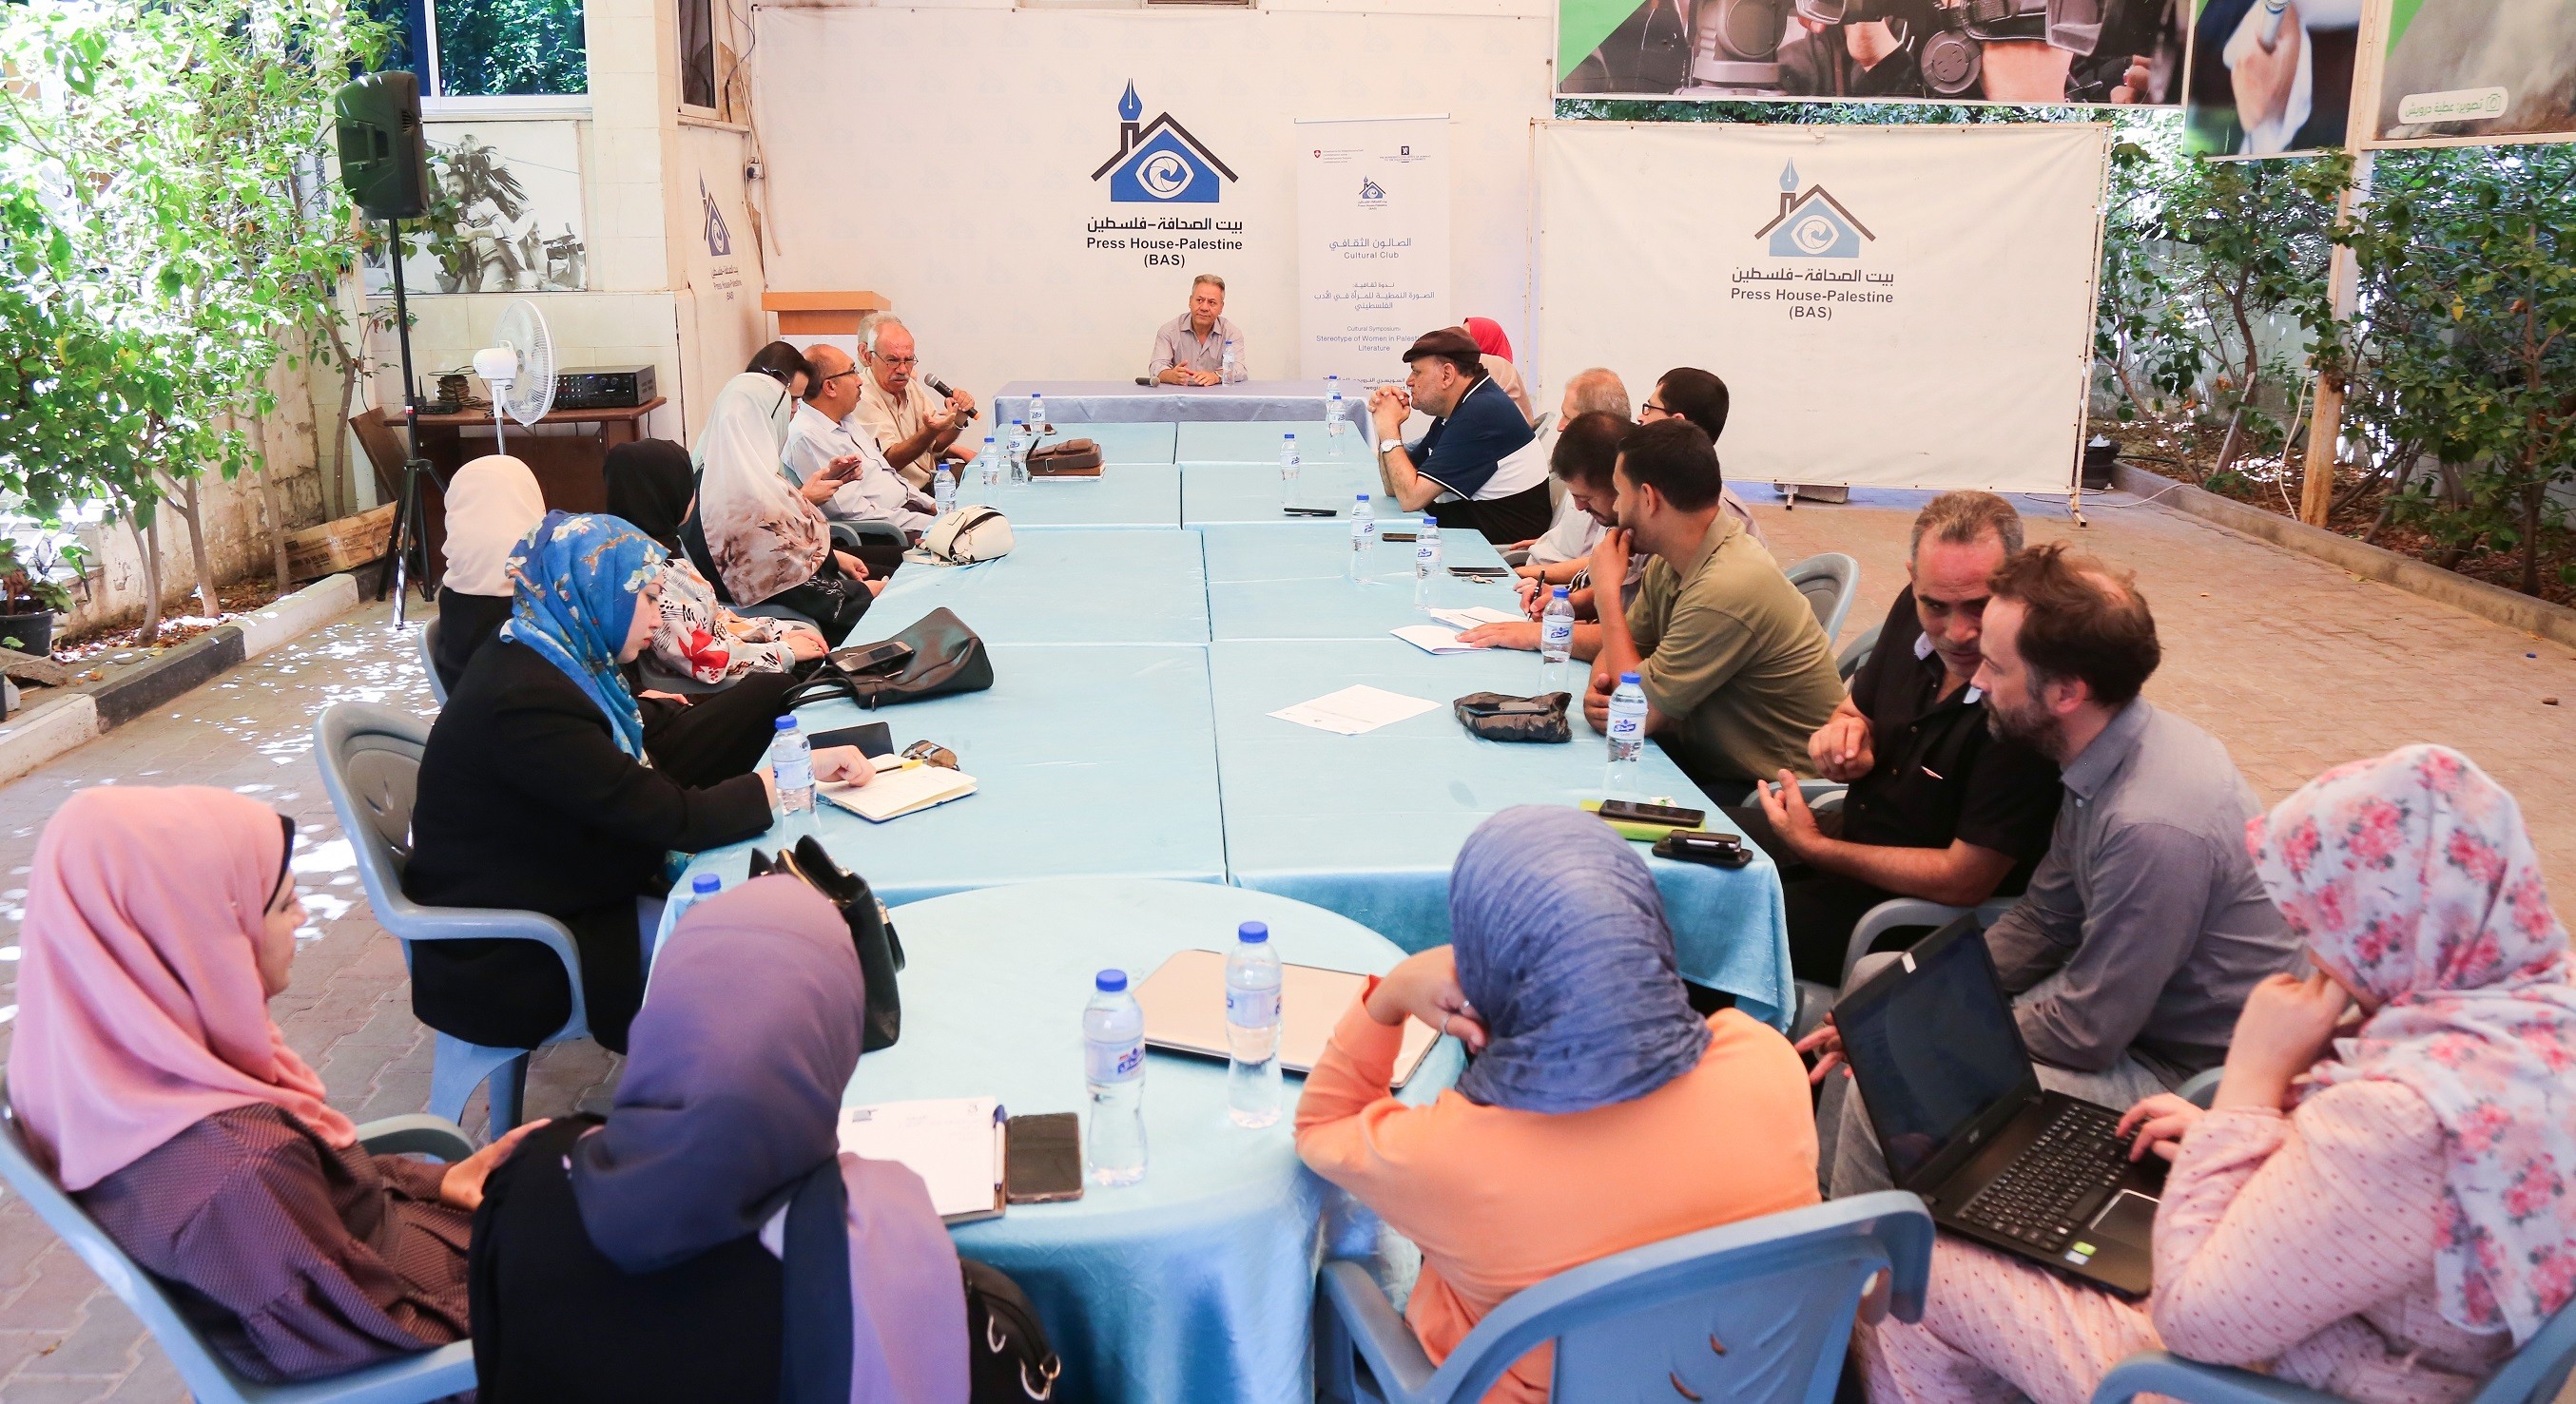 Cultural Club holds a Cultural Symposium on "Stereotype of Women in Palestinian Literature" at Press House